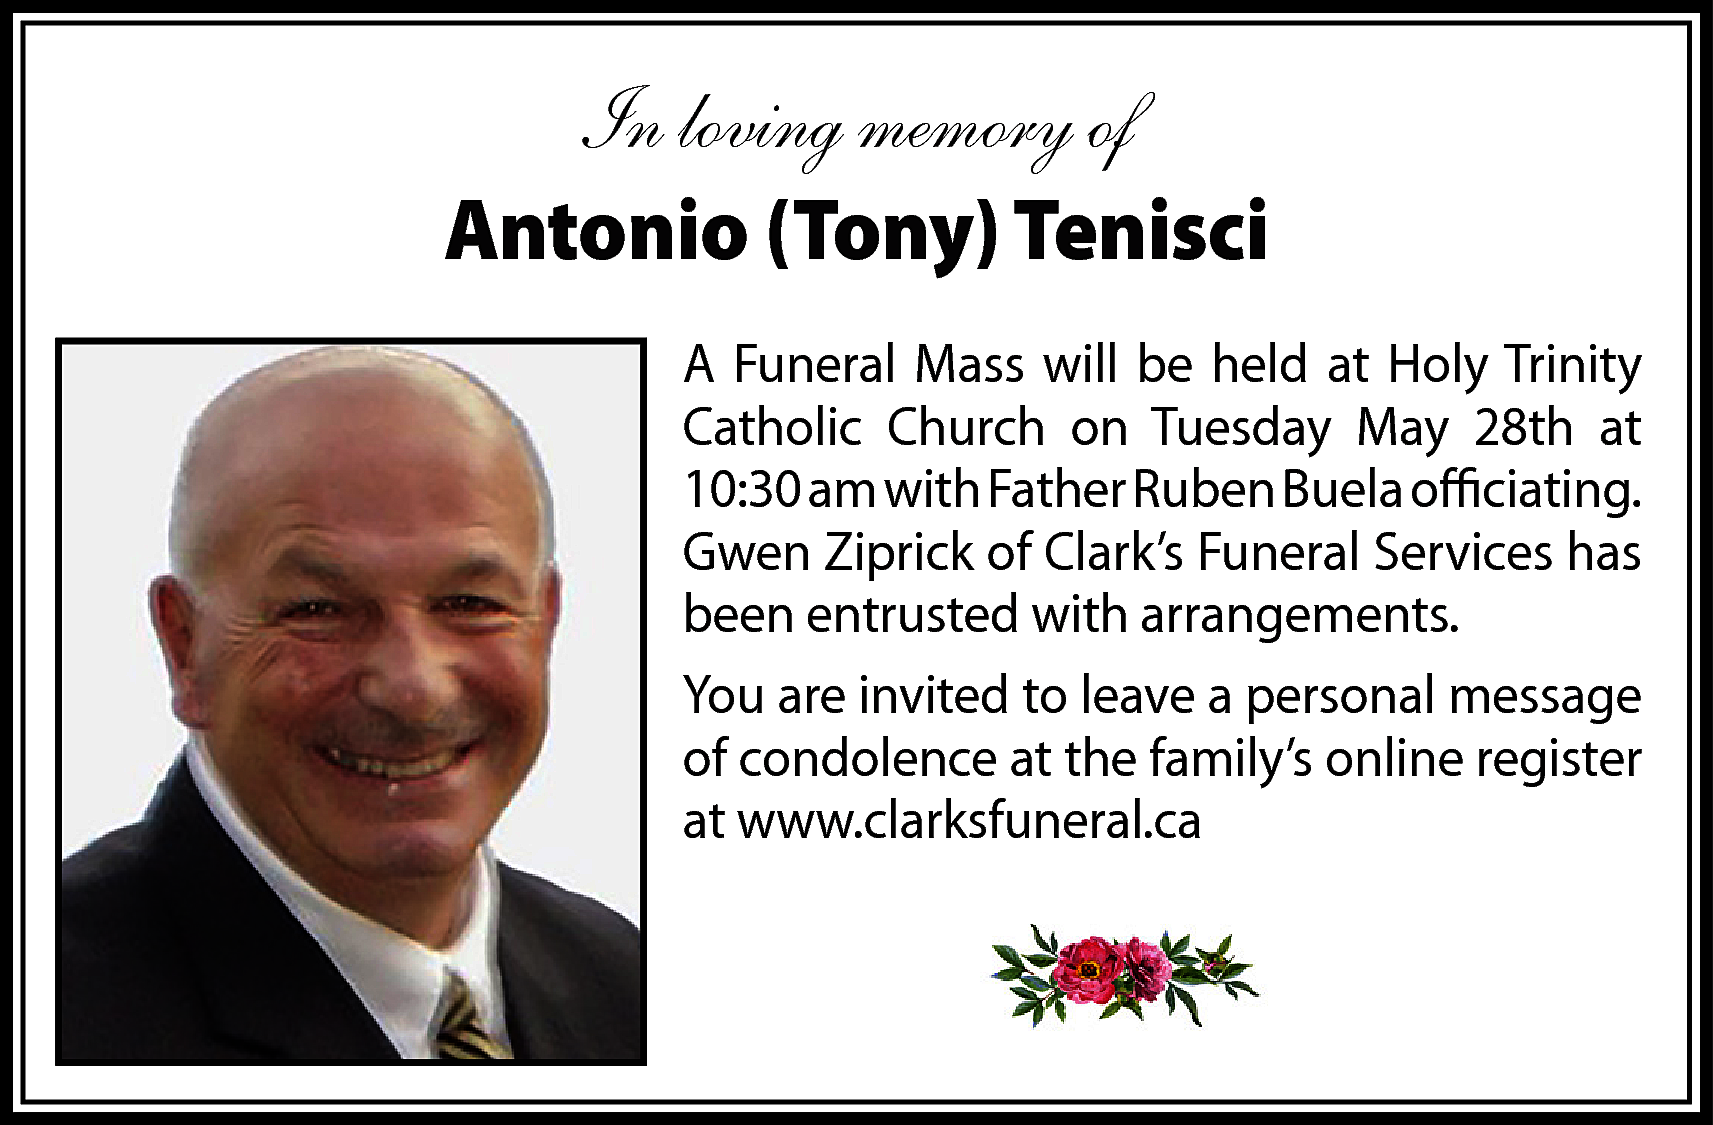 In loving memory of <br>Antonio  In loving memory of  Antonio (Tony) Tenisci  A Funeral Mass will be held at Holy Trinity  Catholic Church on Tuesday May 28th at  10:30 am with Father Ruben Buela officiating.  Gwen Ziprick of Clark’s Funeral Services has  been entrusted with arrangements.  You are invited to leave a personal message  of condolence at the family’s online register  at www.clarksfuneral.ca    